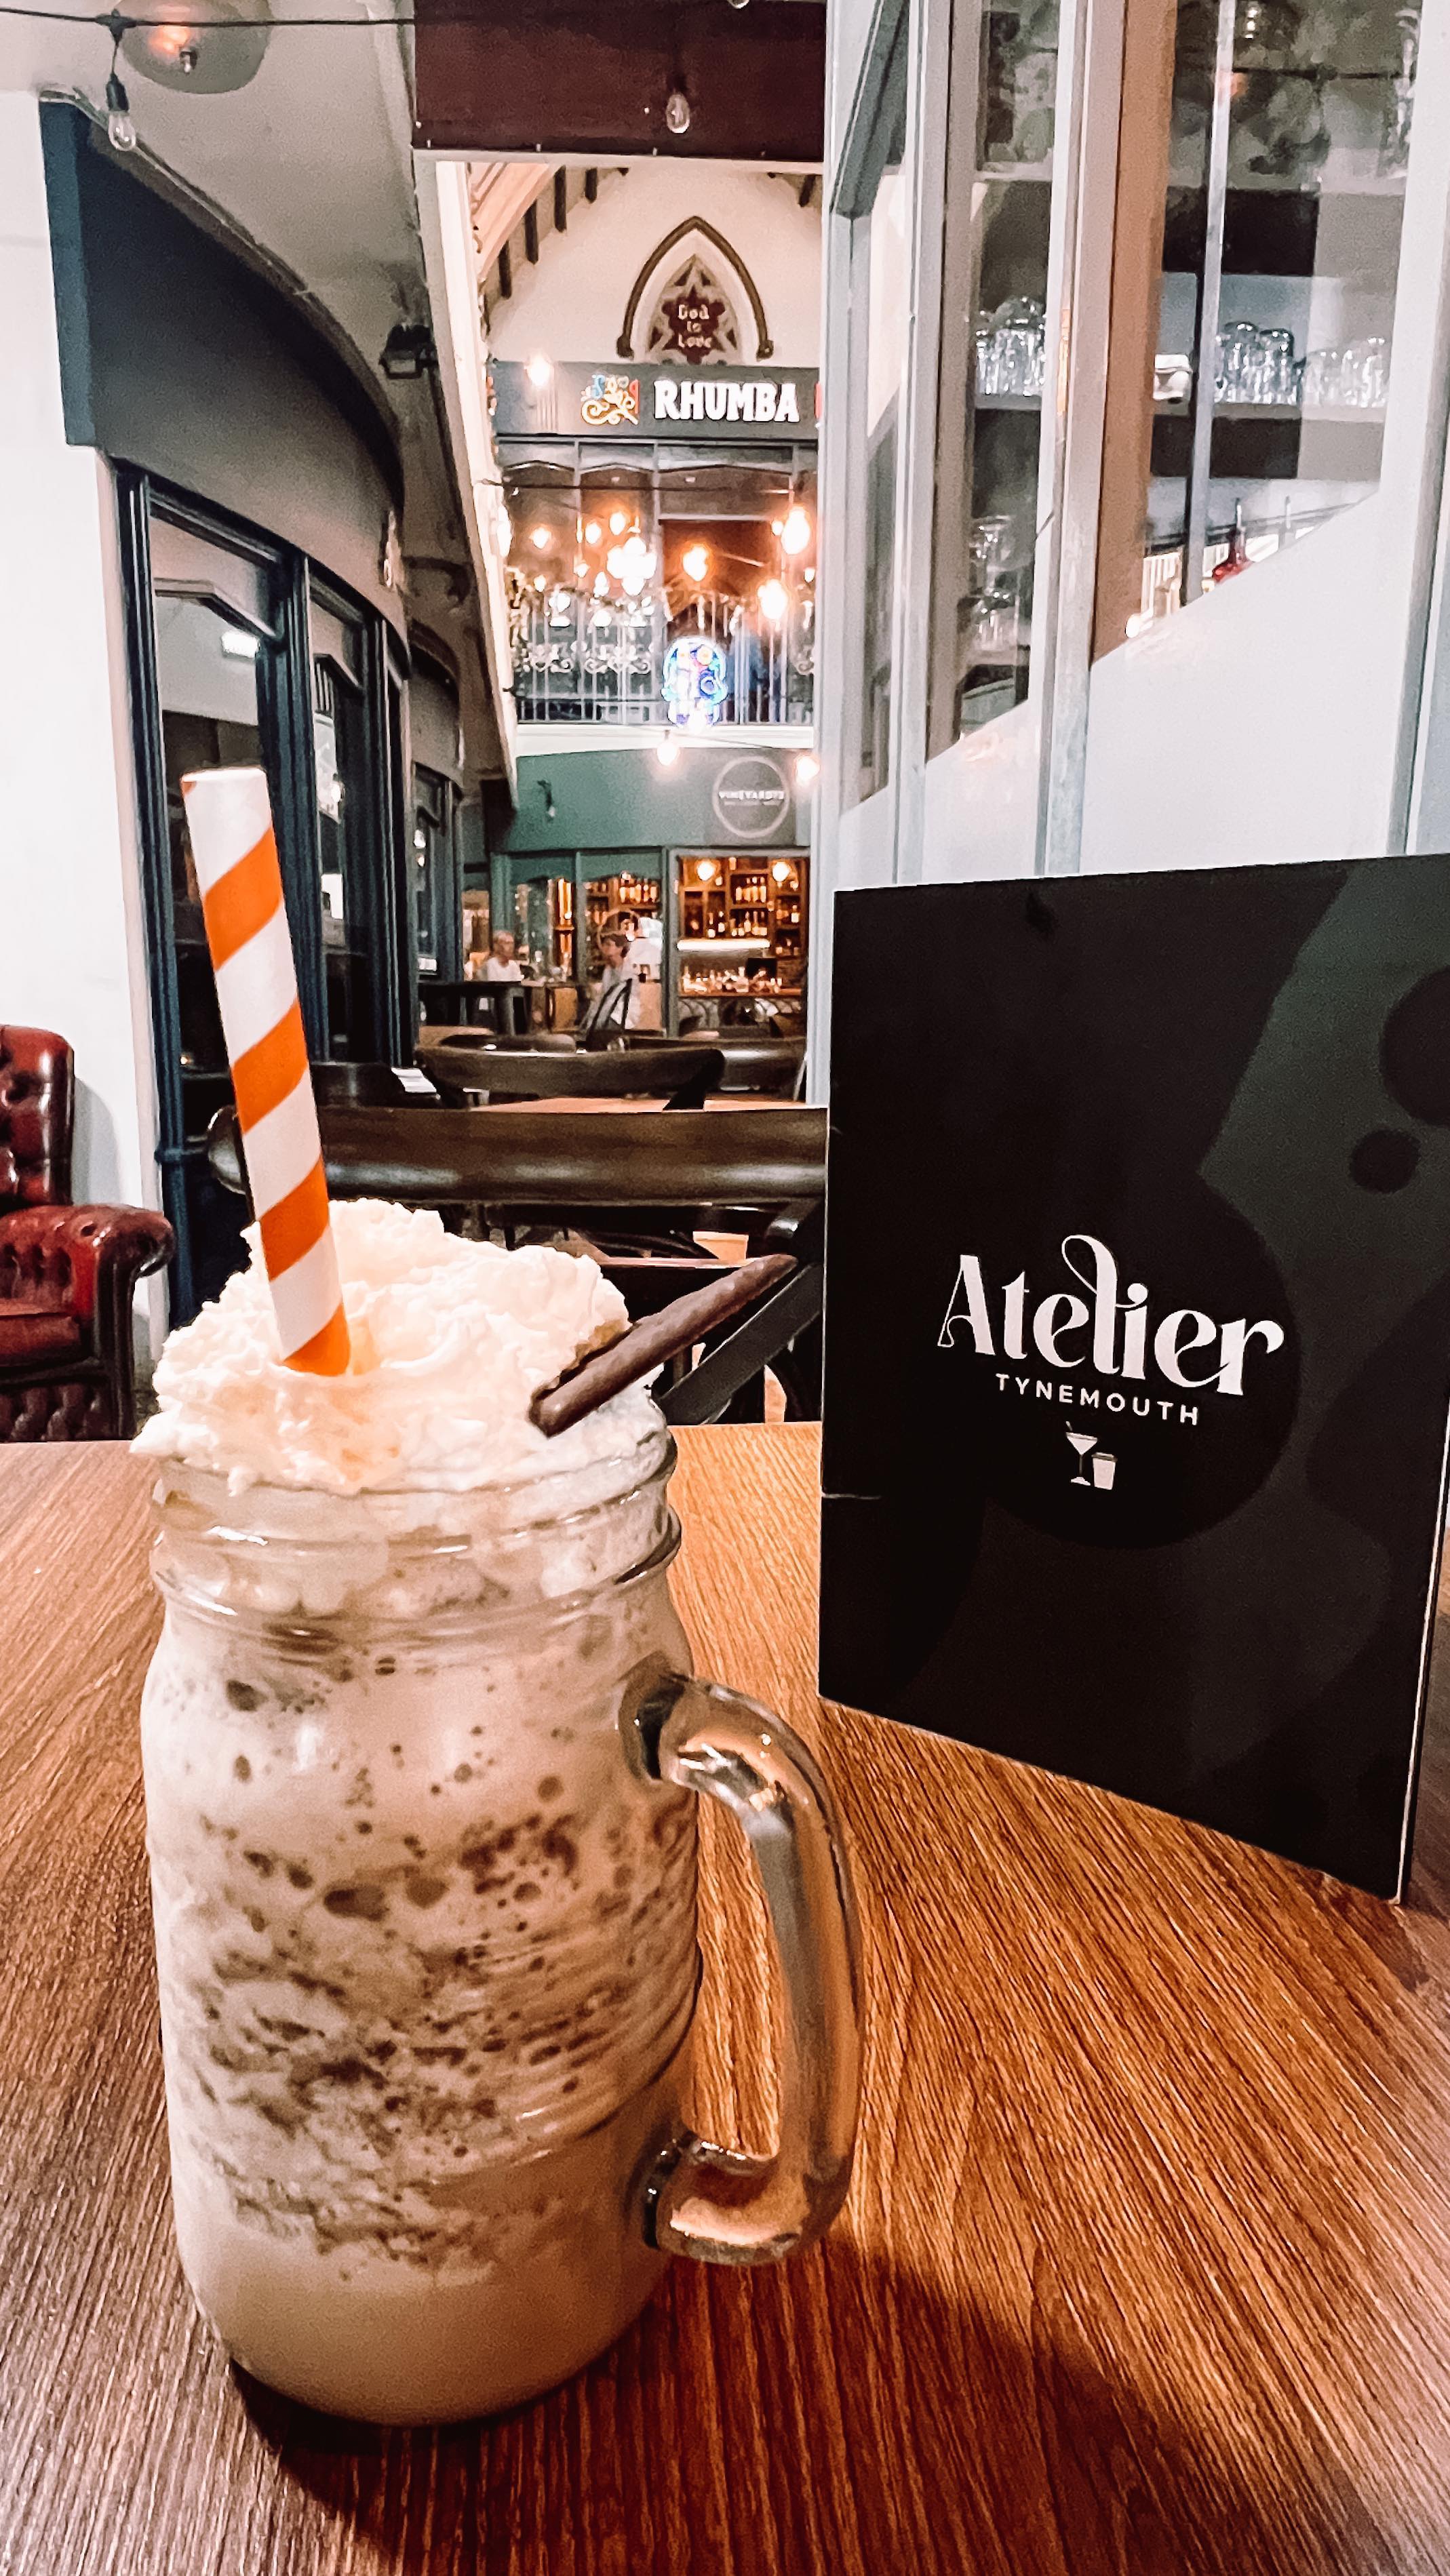 Arthur living his best life with a mint chocolate iced frappe from @atelier_tynemouth at the weekend 🧋

Newly opened in Tynemouth church, dog friendly, outside seating if it’s sunny with a view over Tynemouth front street in the sun, and a big coffee and iced coffee menu. What’s not to love? 🐾 

#icedcoffee #frappe #tynemouth #northtyneside #pug #puglove #dogfriendly #northeastdogs #yourcoasts  #northeastfood #newcastle #newcastleupontyne #livingnorth #nefoodbloggers #nebloggers #northeast #newcastlelifestyle #newcastlelife #newcastlefood #newcastlefoodblog  #newcastleeats #northeasteats #northeastfood #northeastfoodblogger #lifestyle #lifestyleblogger #lovenewcastle #Newcastleblogger #newcastlefoodies